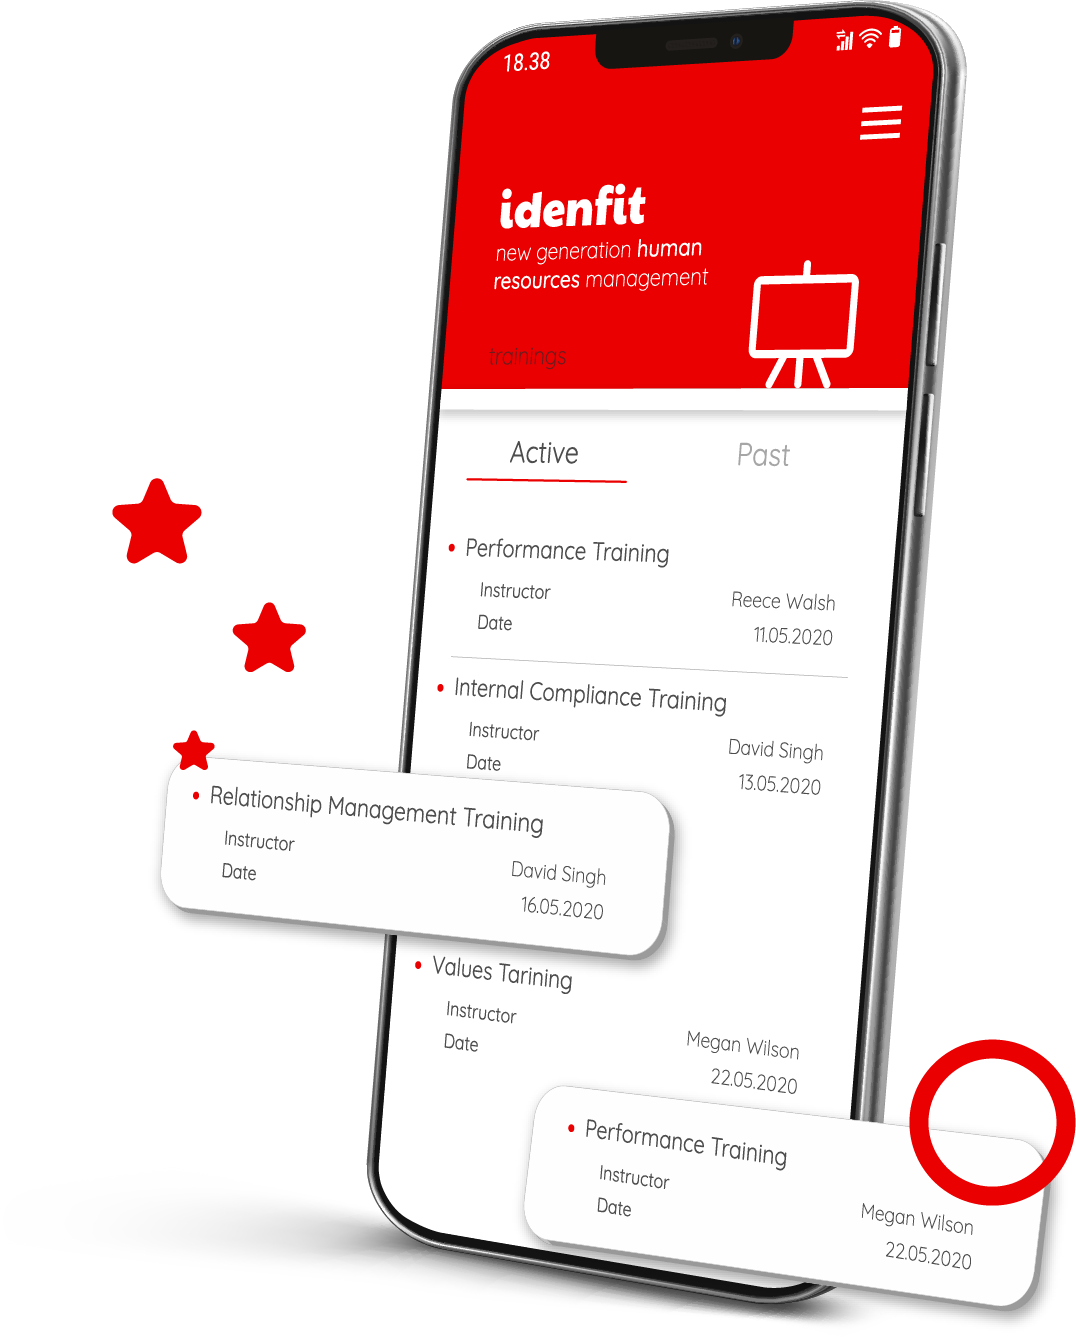 Idenfit allows you to manage all in-house or outsourced corporate training sessions smoothly